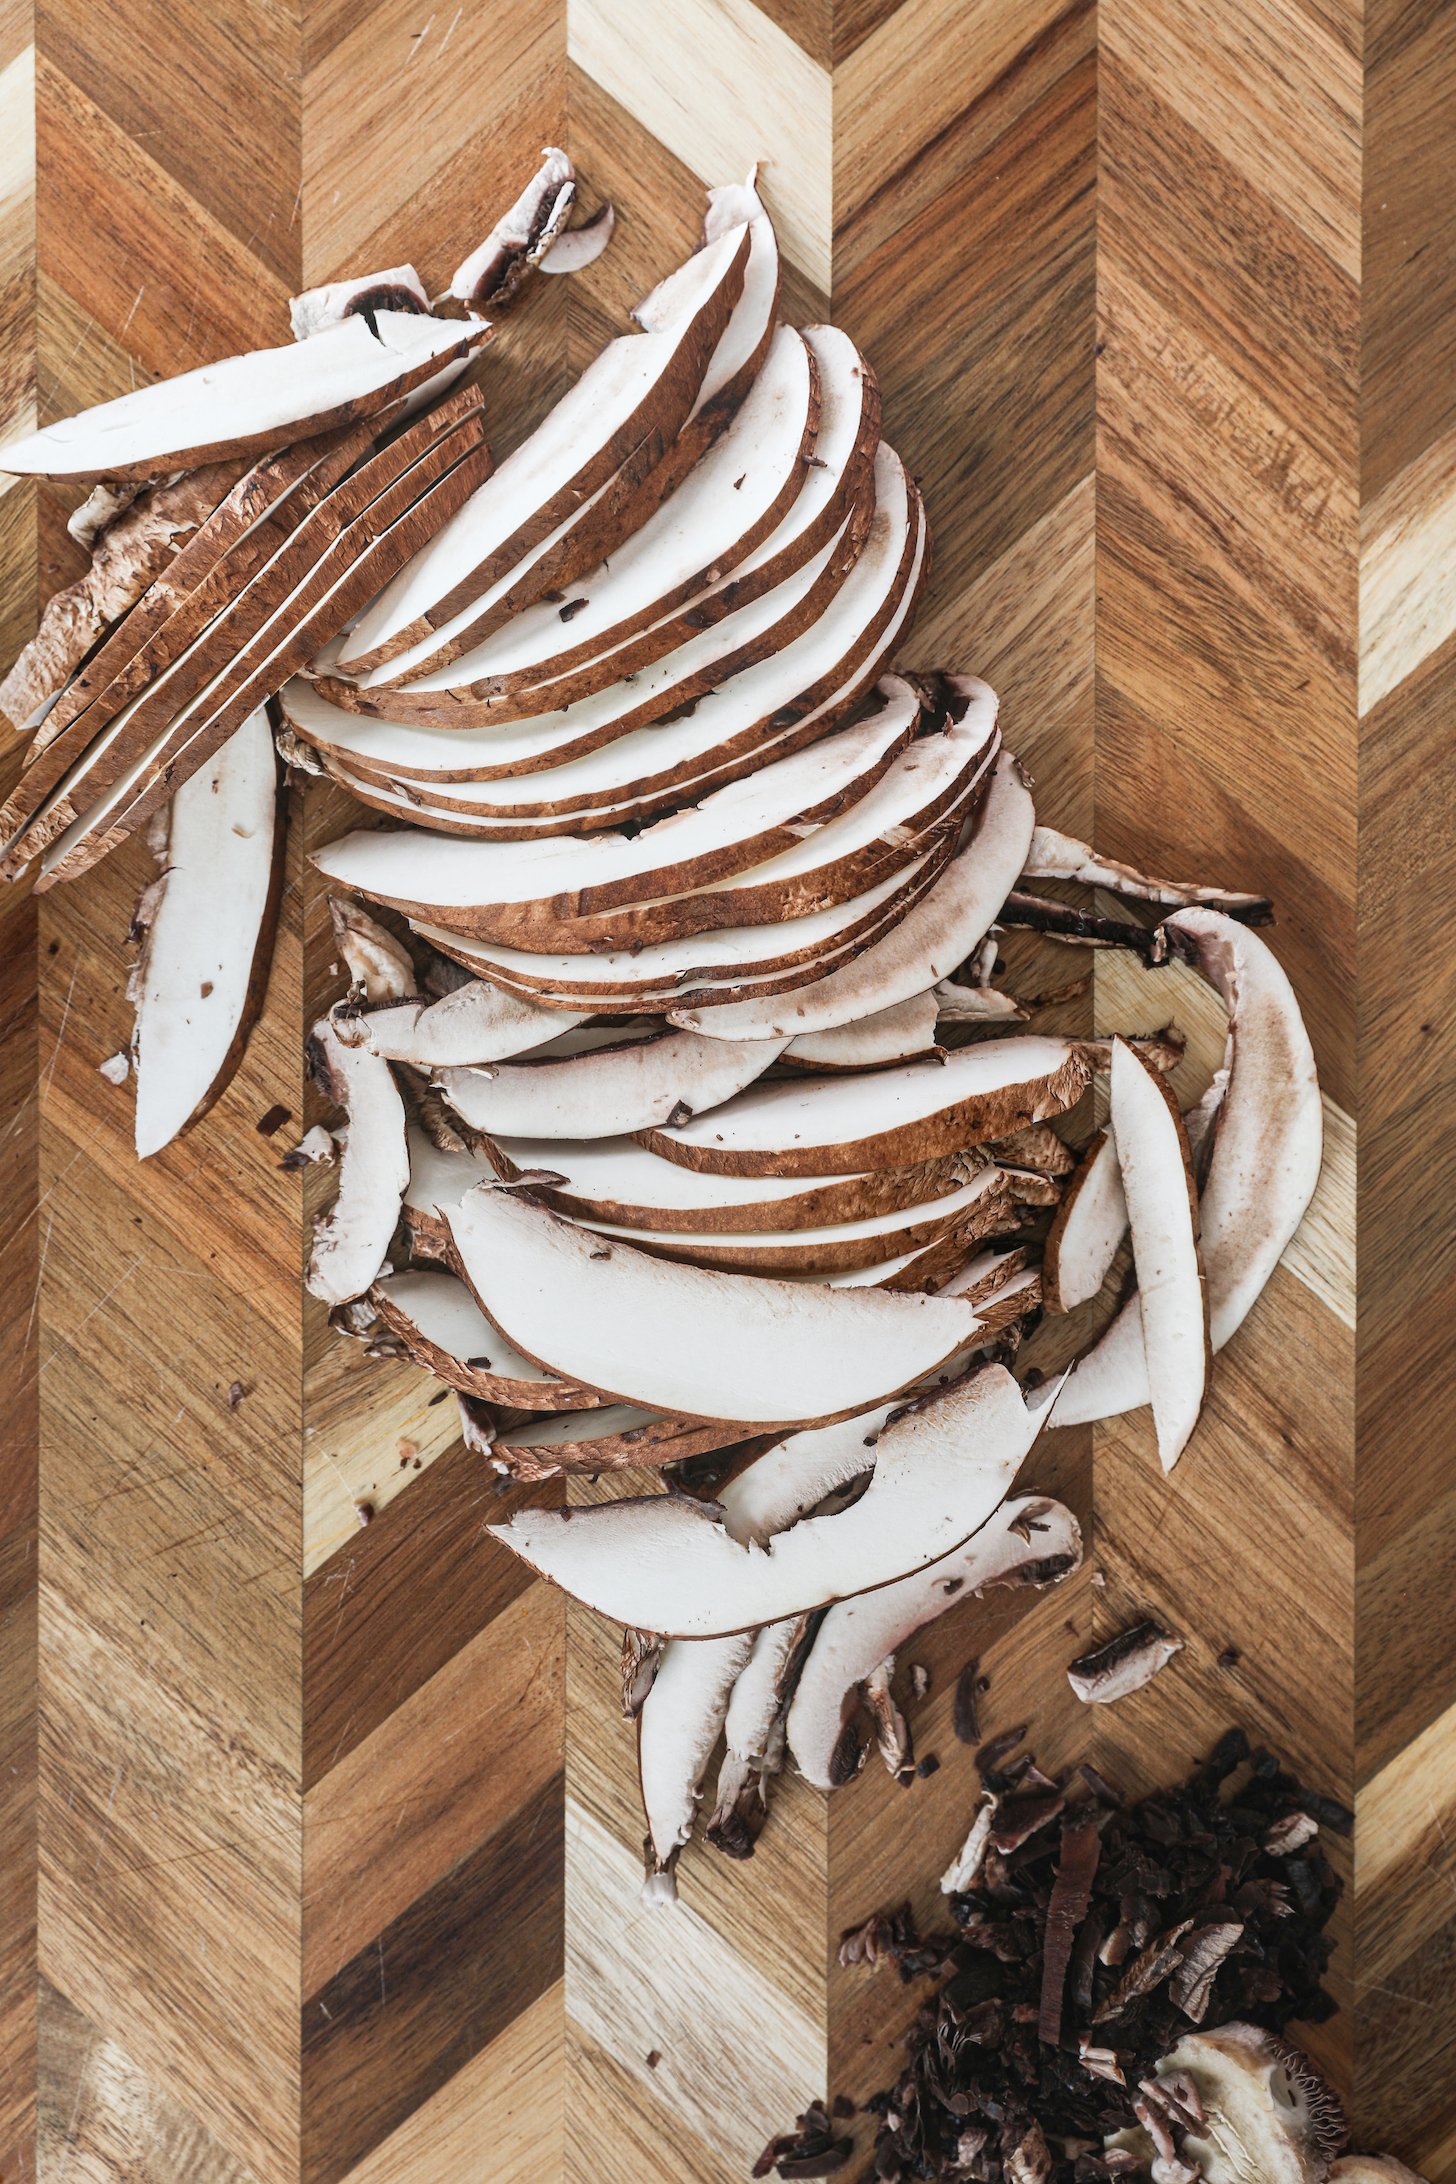 Thinly sliced mushrooms on a wooden board.